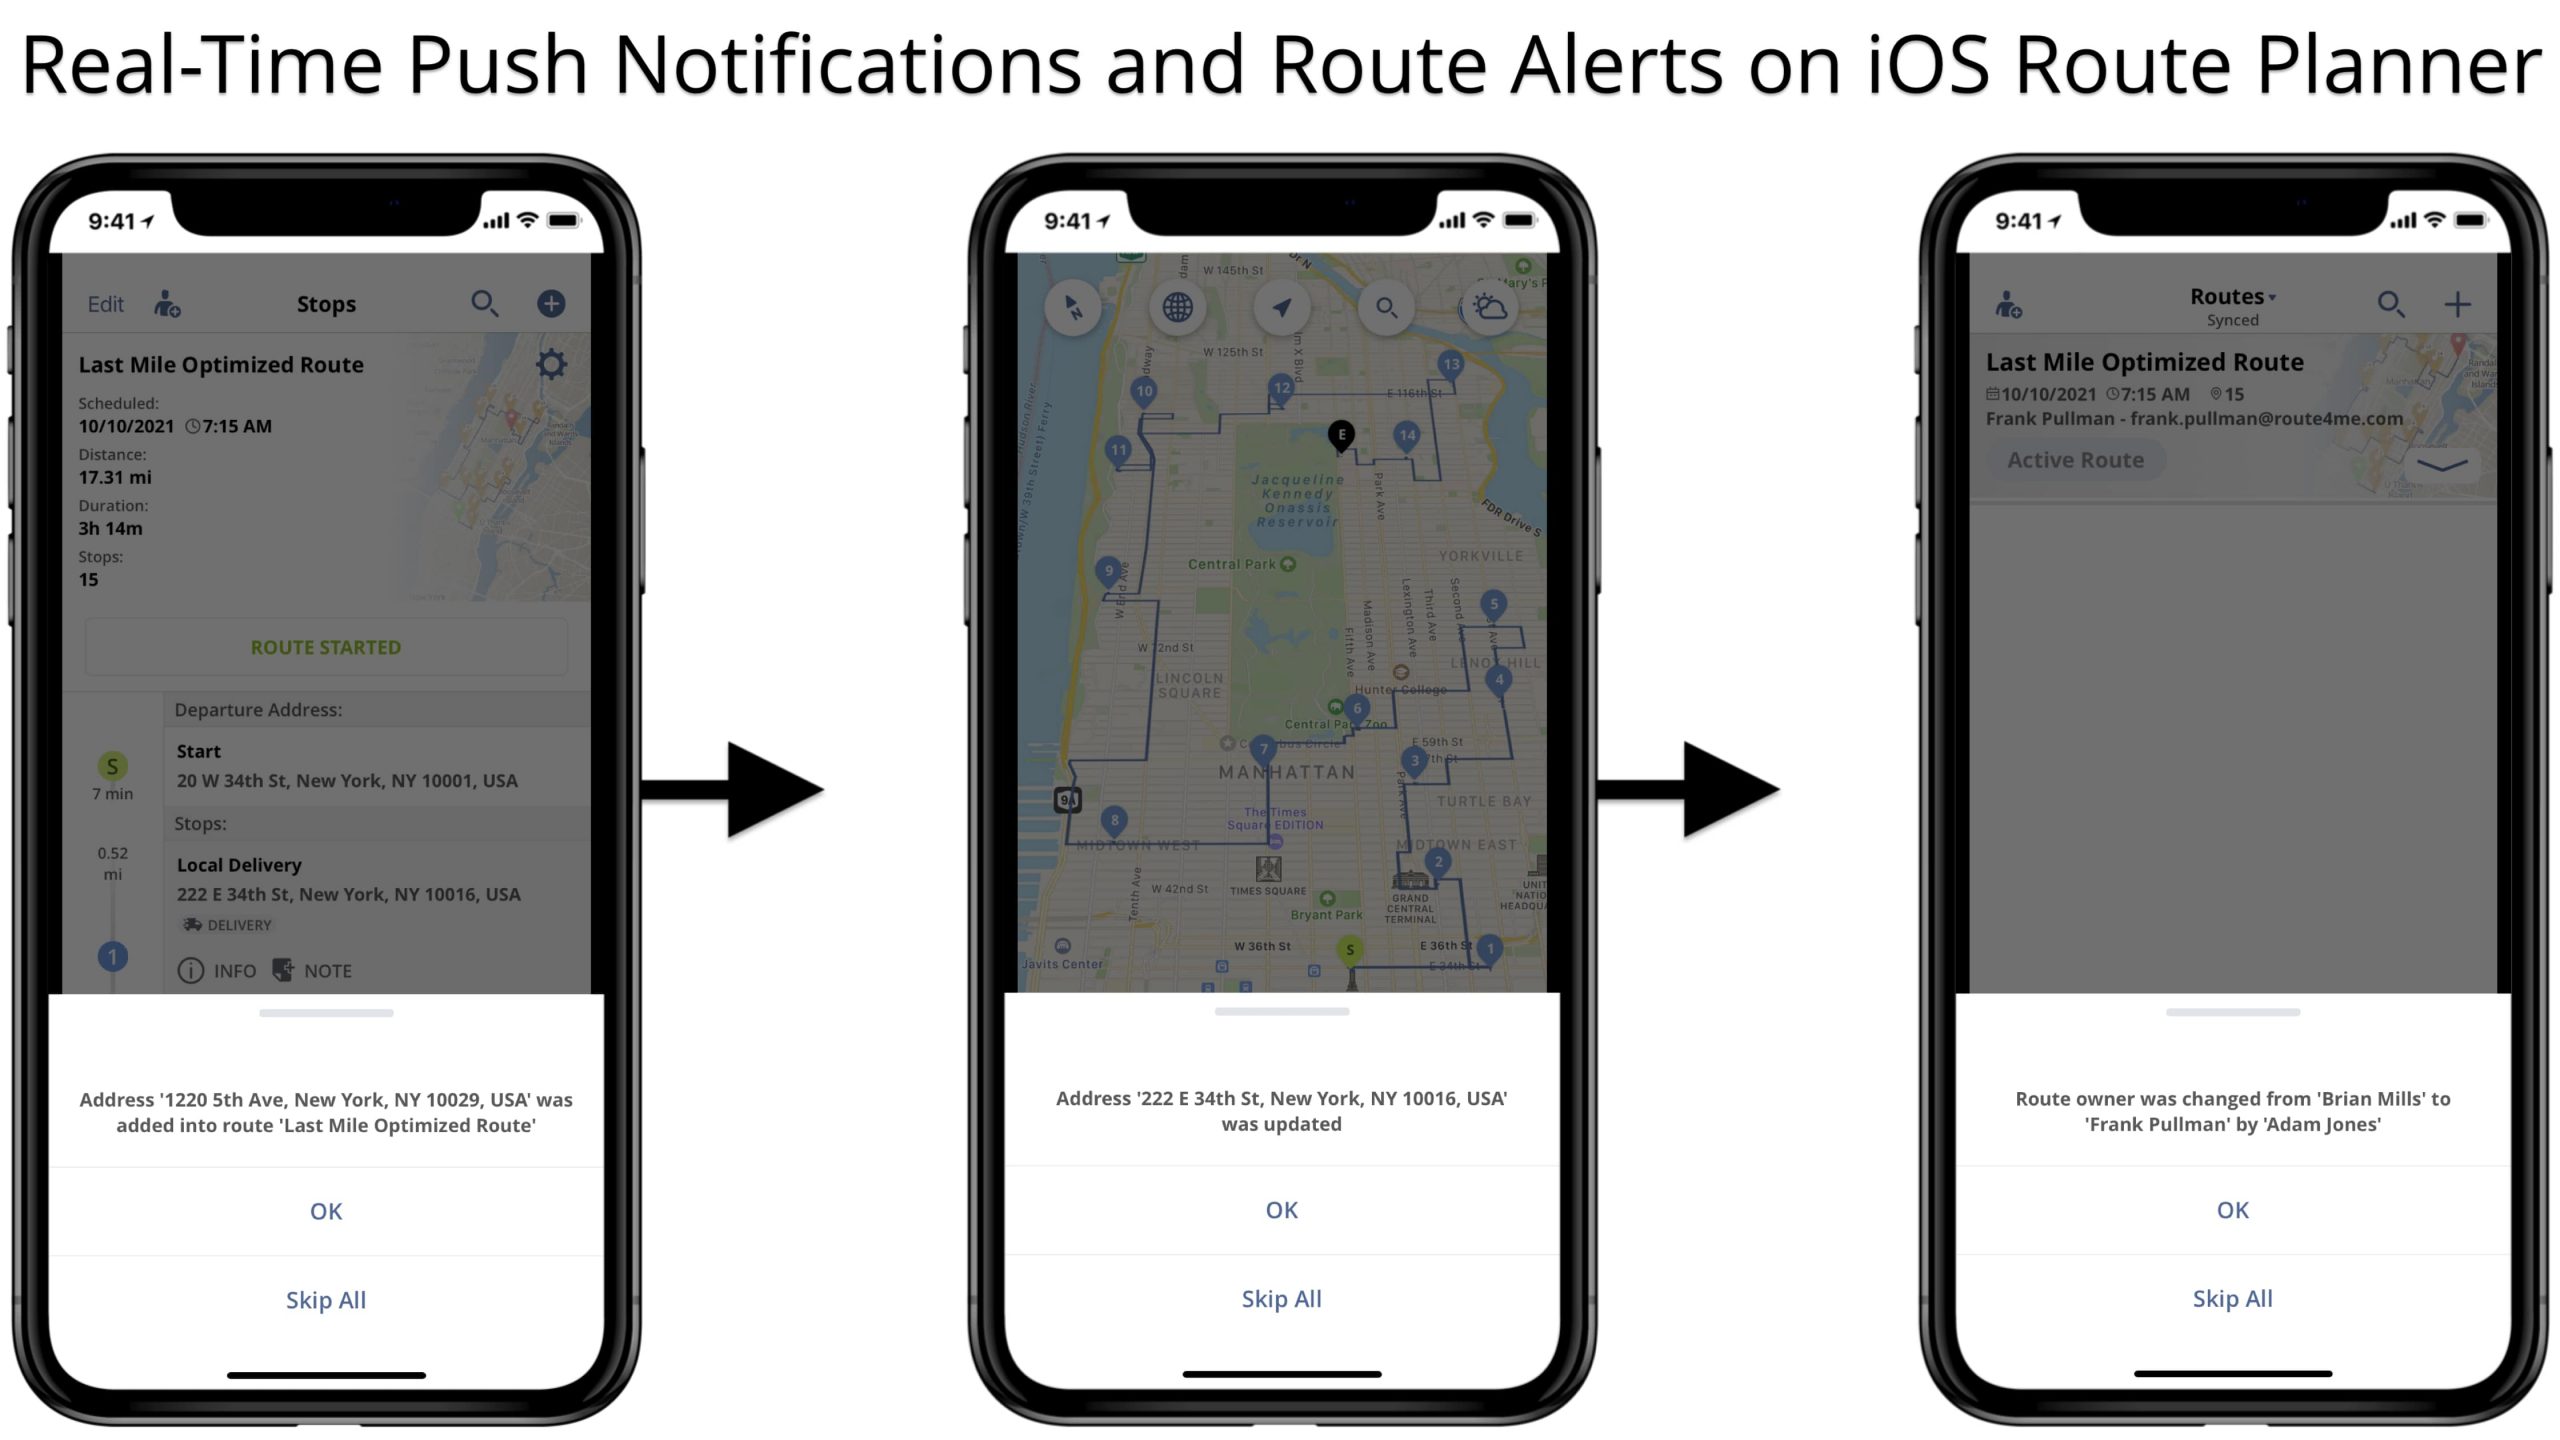 Real-time push notifications and route updates notifications on the iOS Route Planner app.